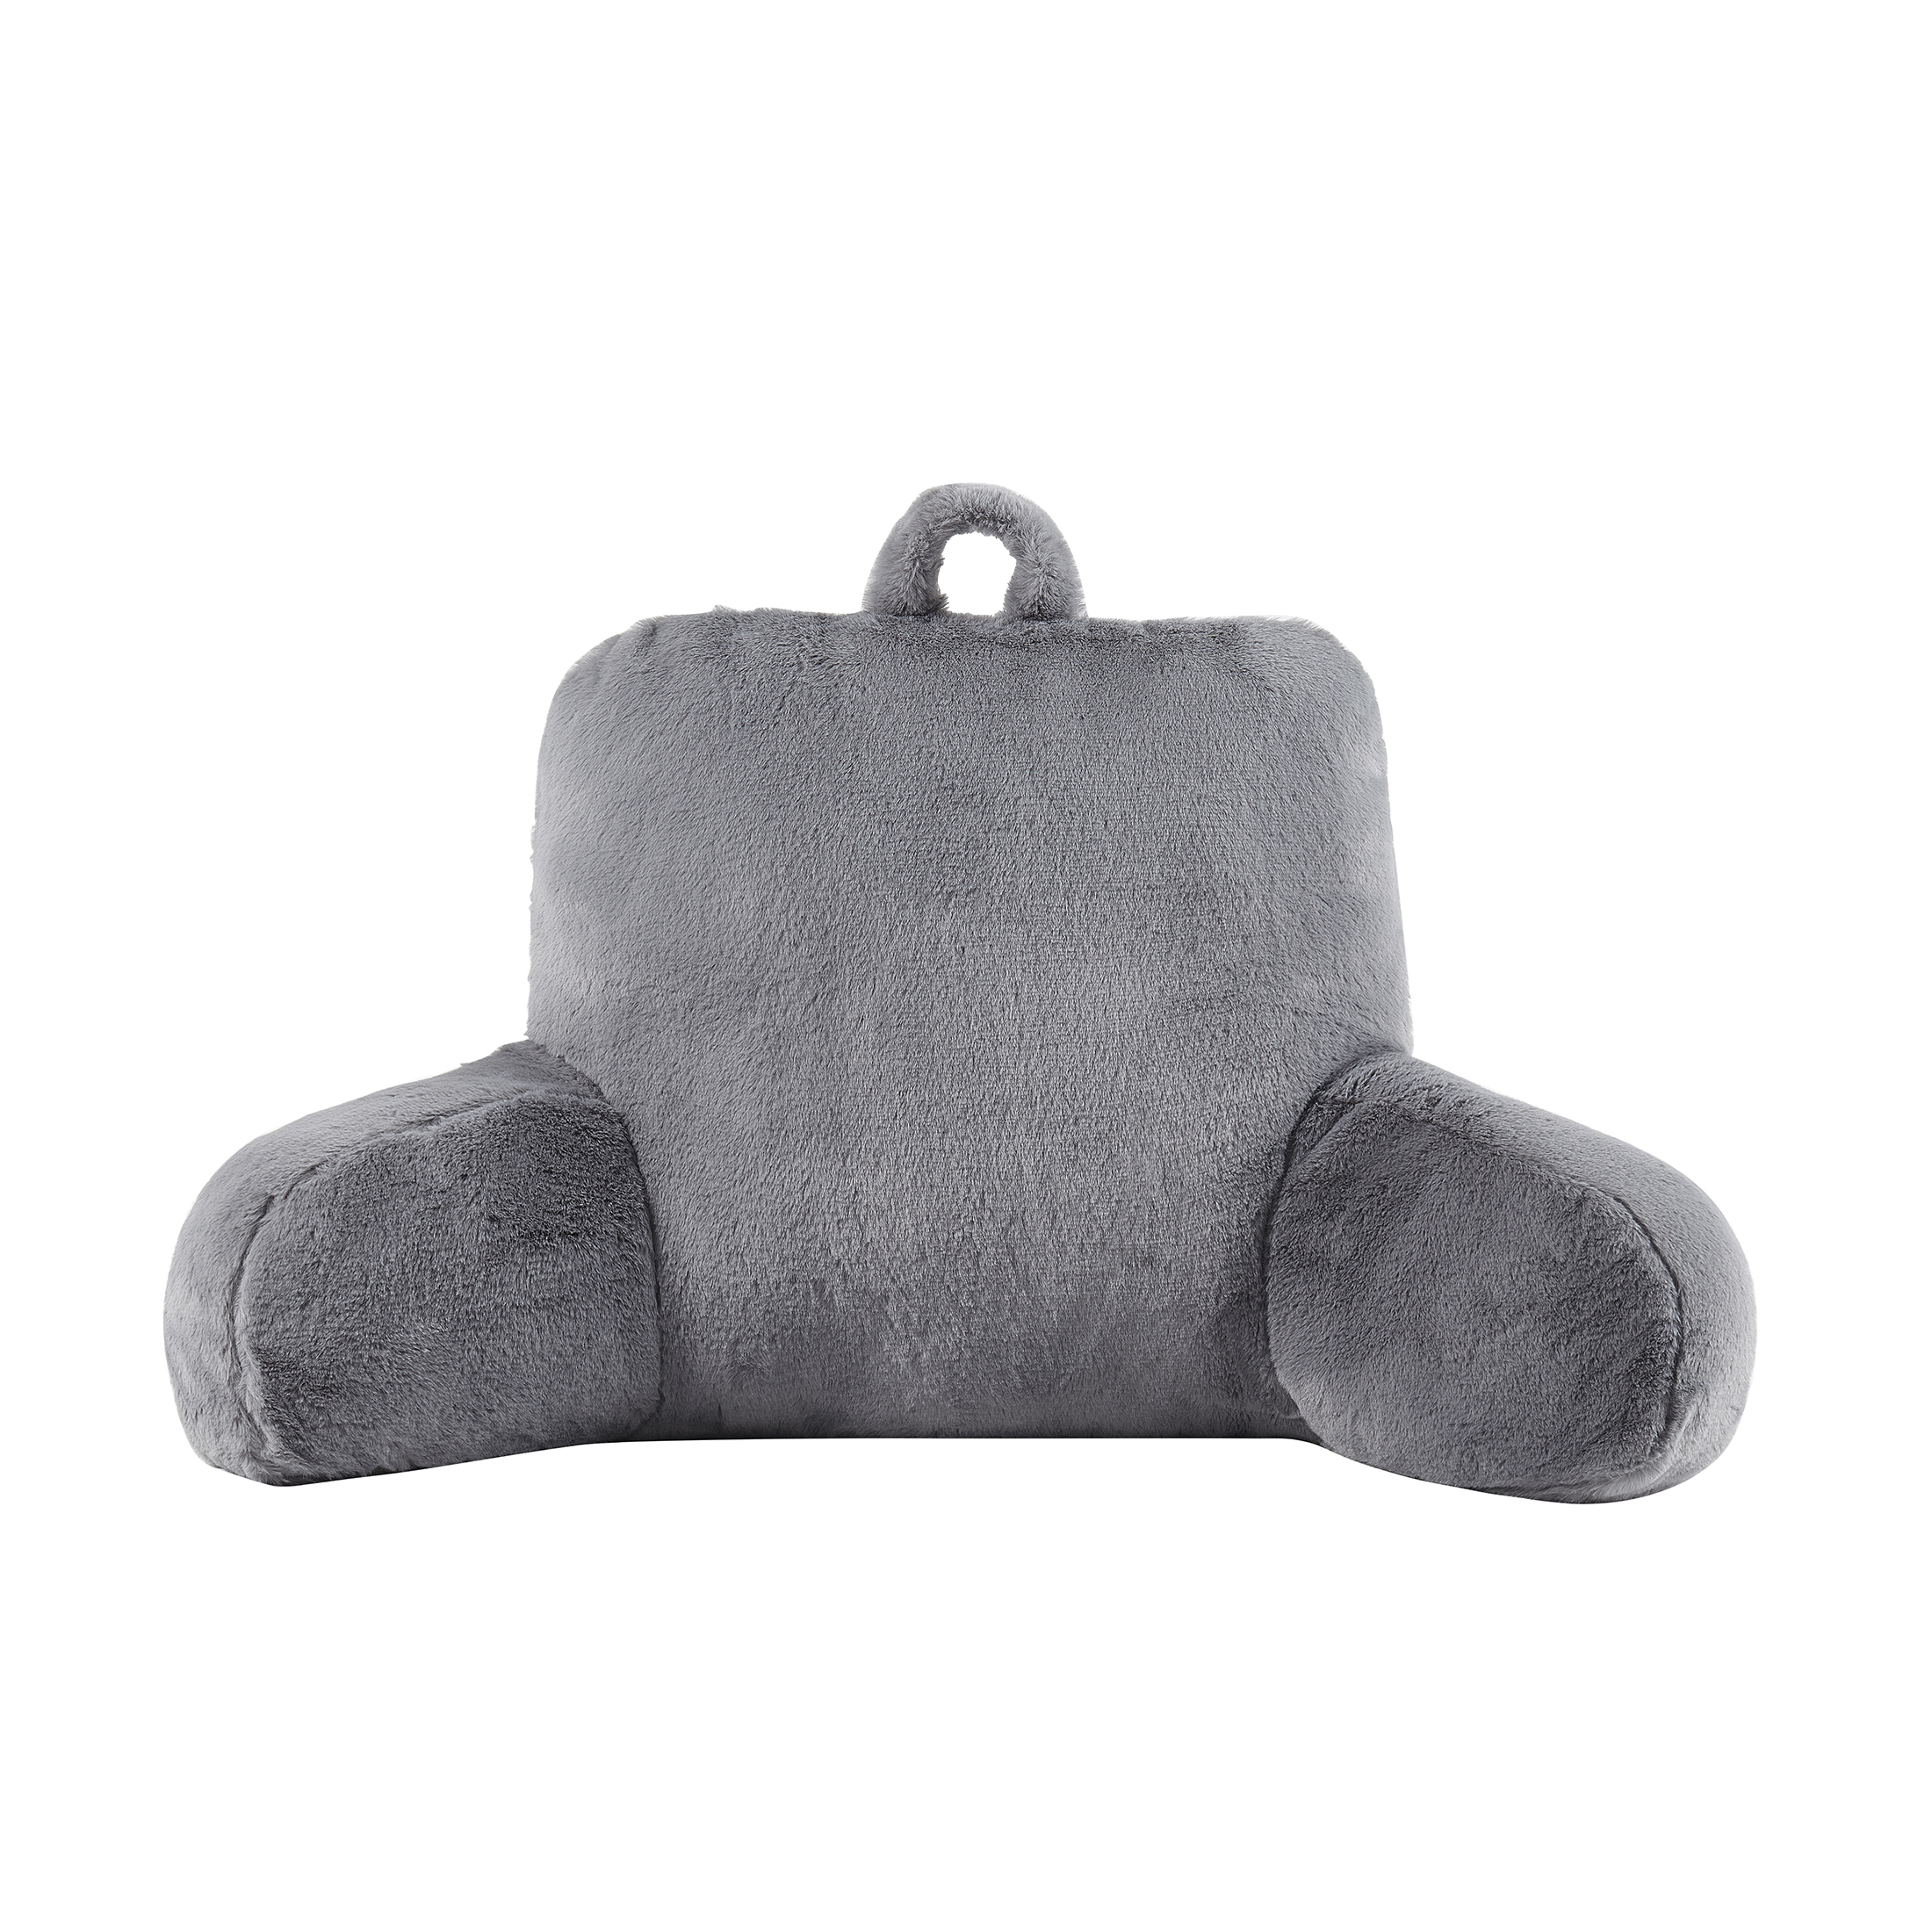 Mainstays Faux Fur Plush Bedrest Pillow, Specialty Size, Gray - image 1 of 6